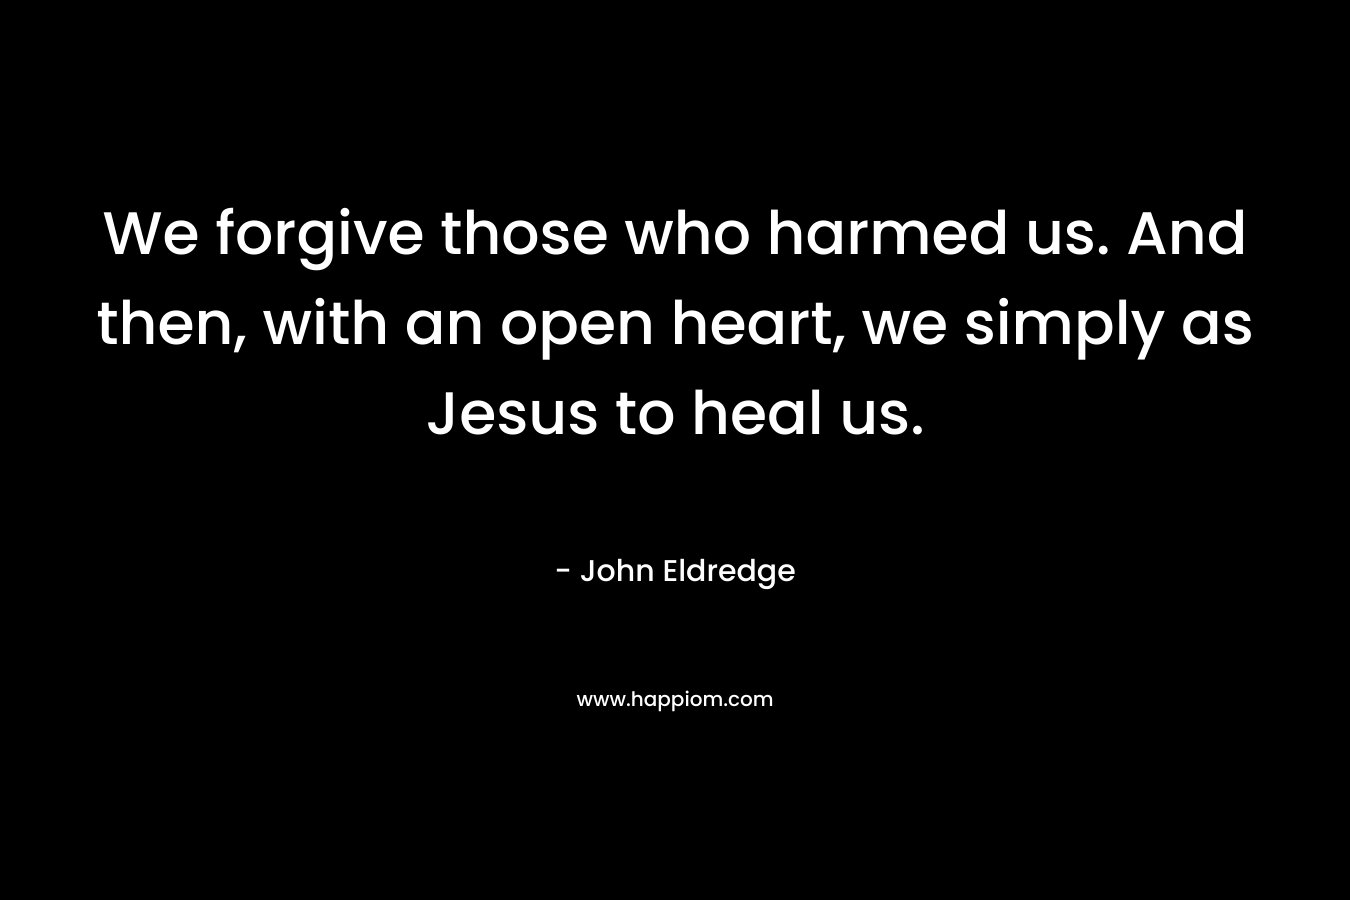 We forgive those who harmed us. And then, with an open heart, we simply as Jesus to heal us.